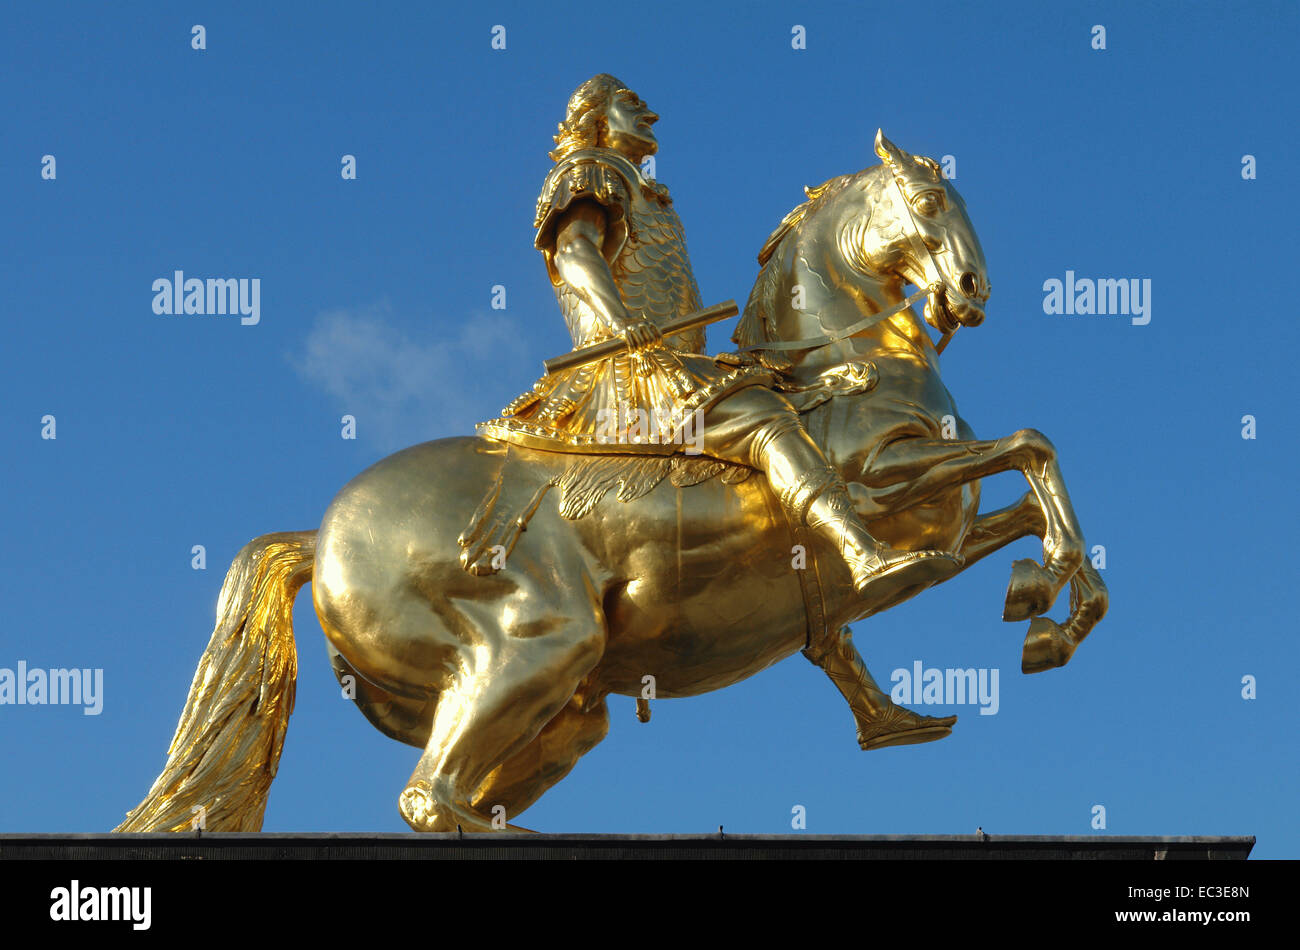 Golden Rider, Equestrian Statue of Augustus the Strong, Dresden, Germany Stock Photo